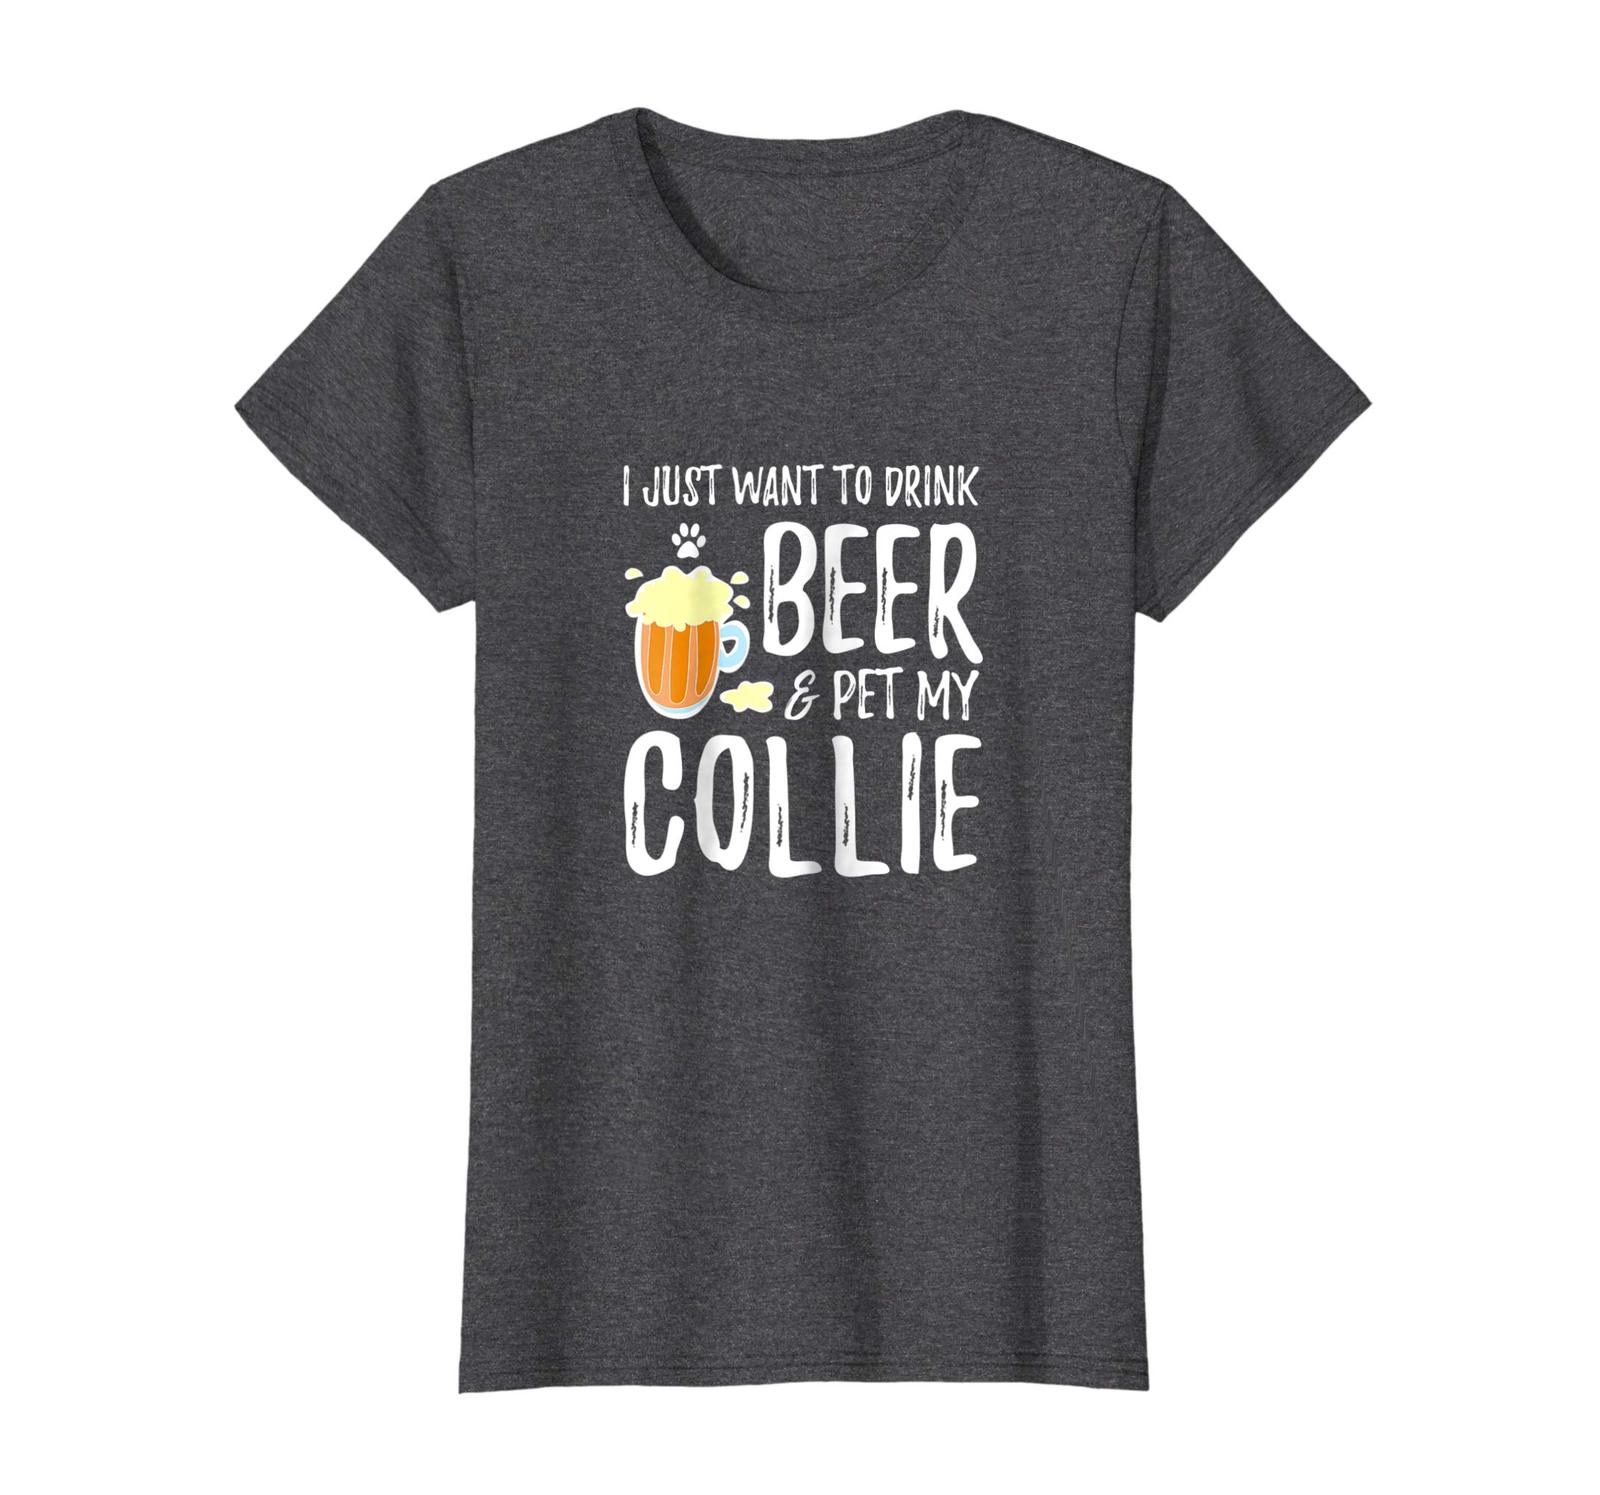 Dog Fashion - Beer and Collie Shirt Funny Dog Mom or Dog Dad Gift Idea Wowen